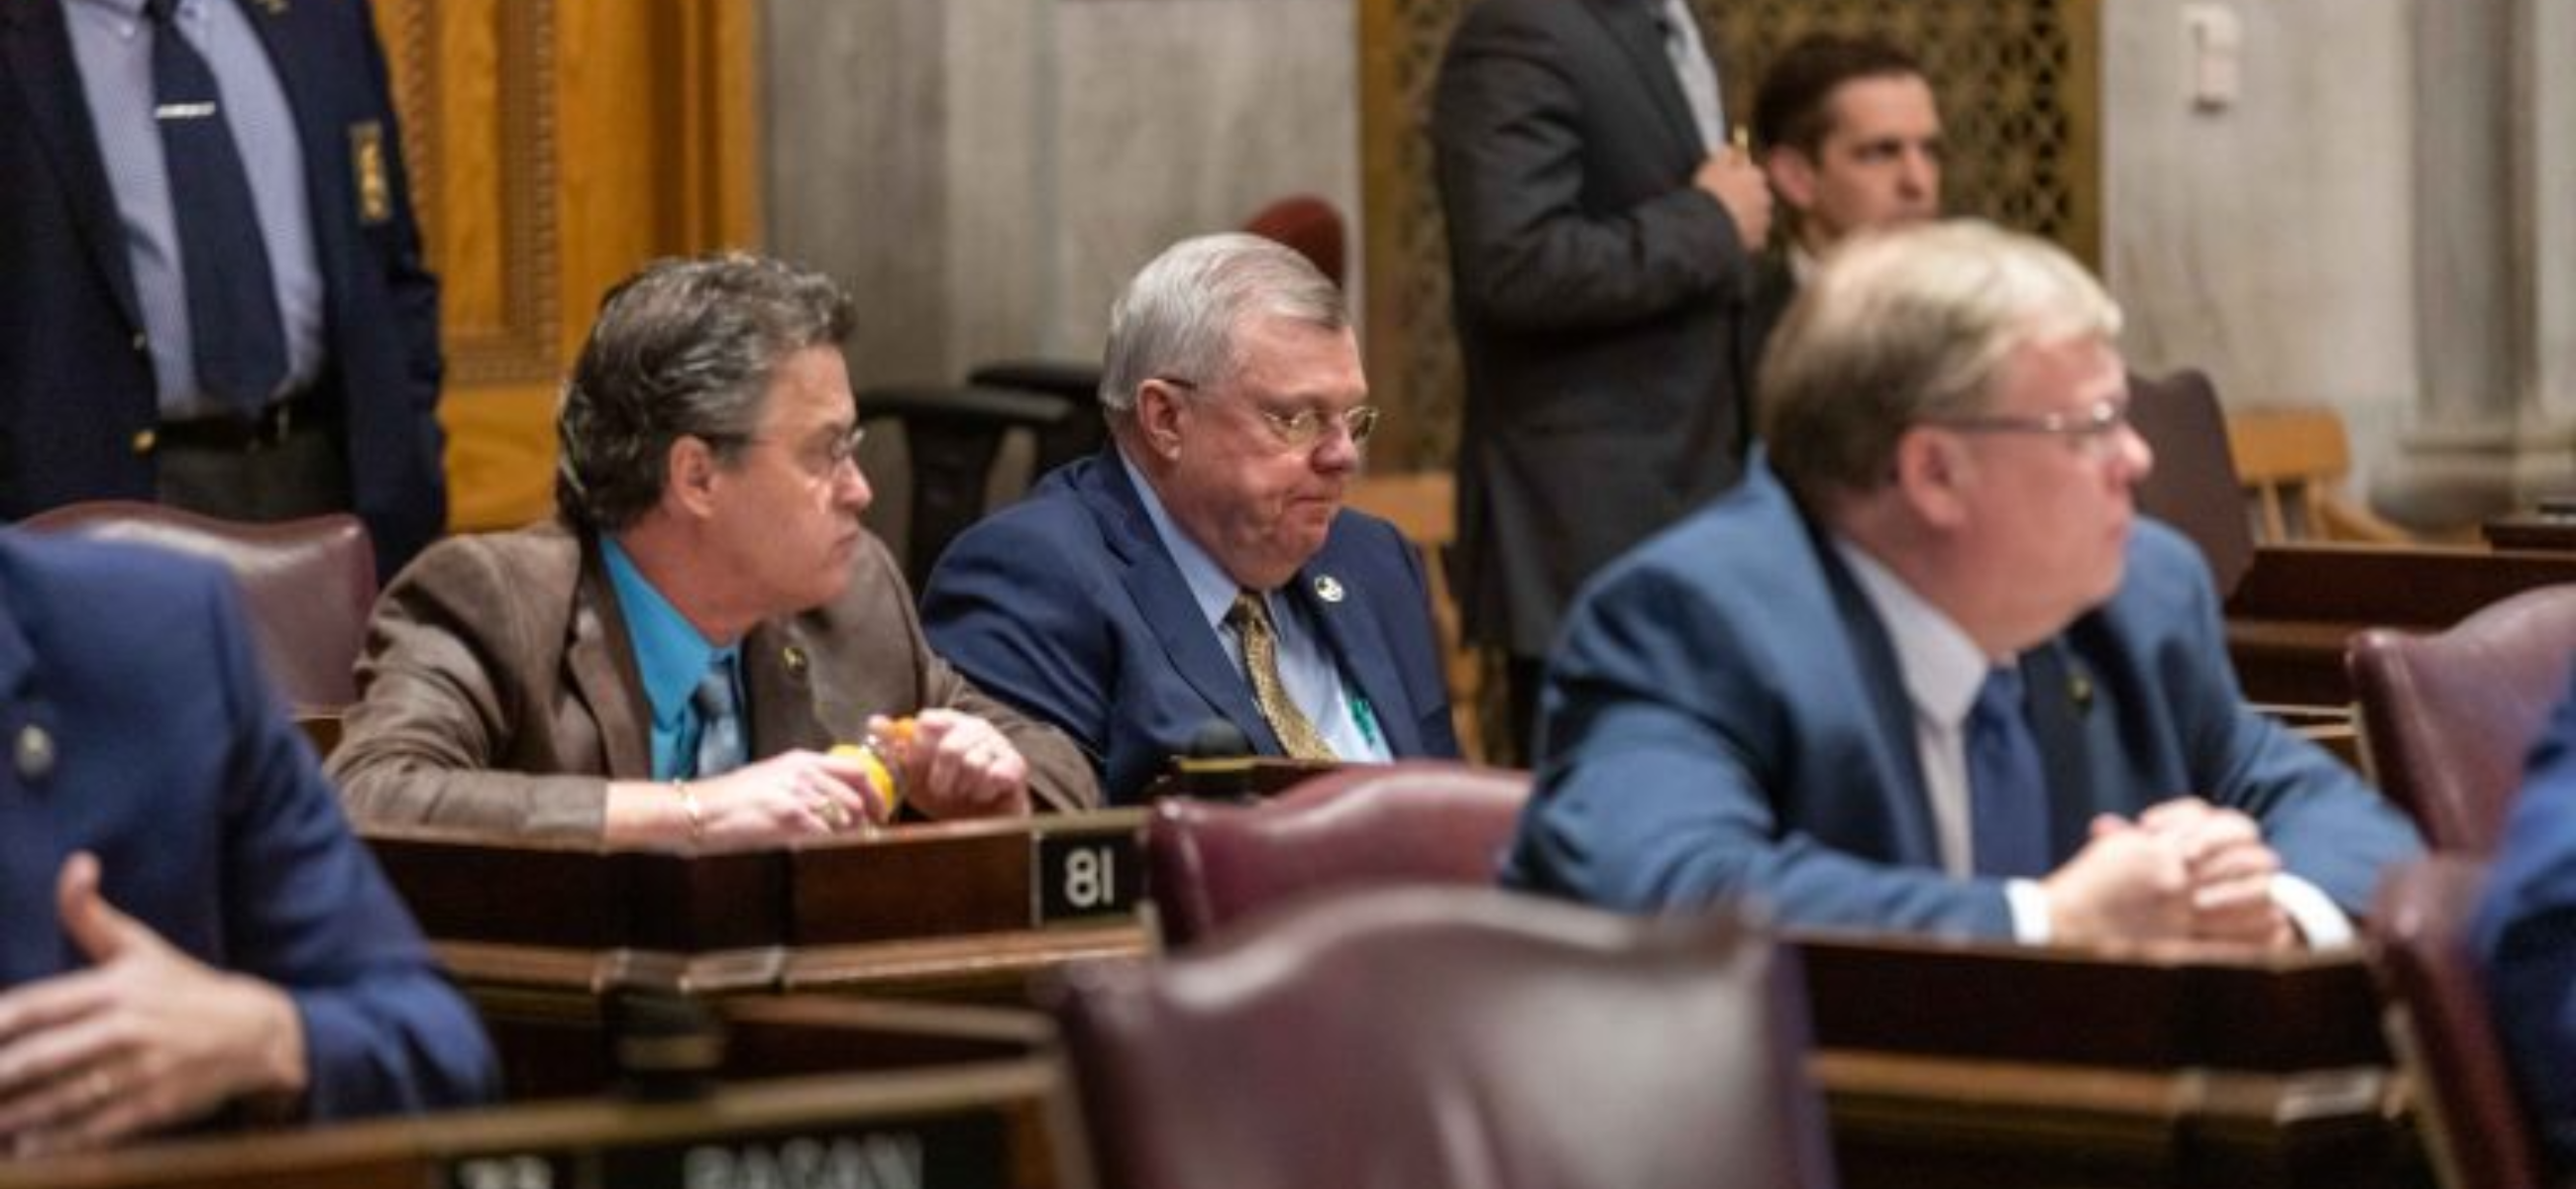 Rep. Curtis Johnson (R-Clarksville), seated, center, attends a House floor session in Nashville. At left is Rep. John Holsclaw (R-Elizabethton) and Tim Rudd (R-Murfreesboro) is to the right. (Erik Schelzig, Tennessee Journal)